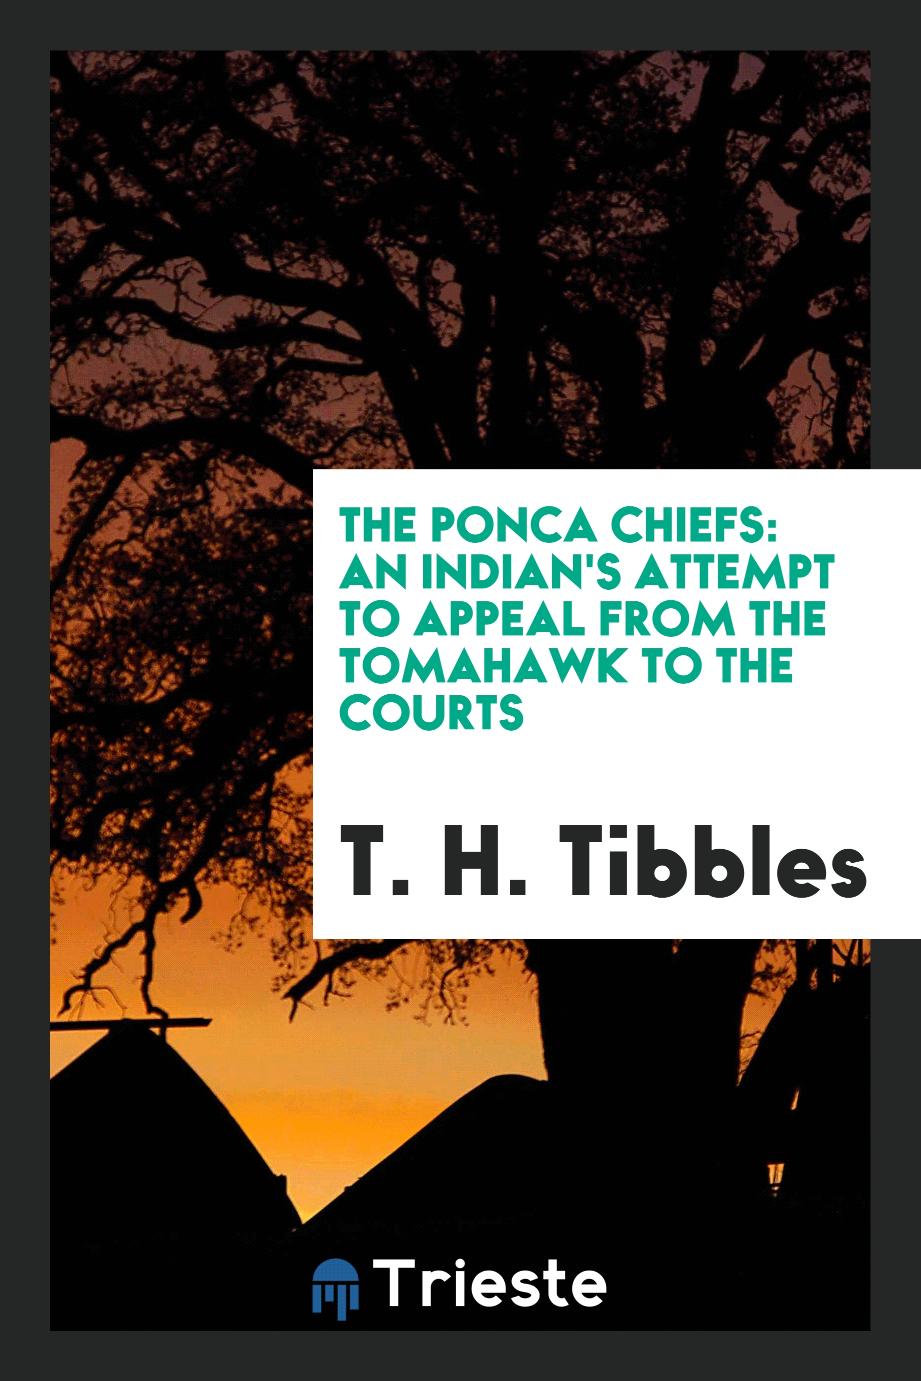 The Ponca Chiefs: An Indian's Attempt to Appeal from the Tomahawk to the Courts